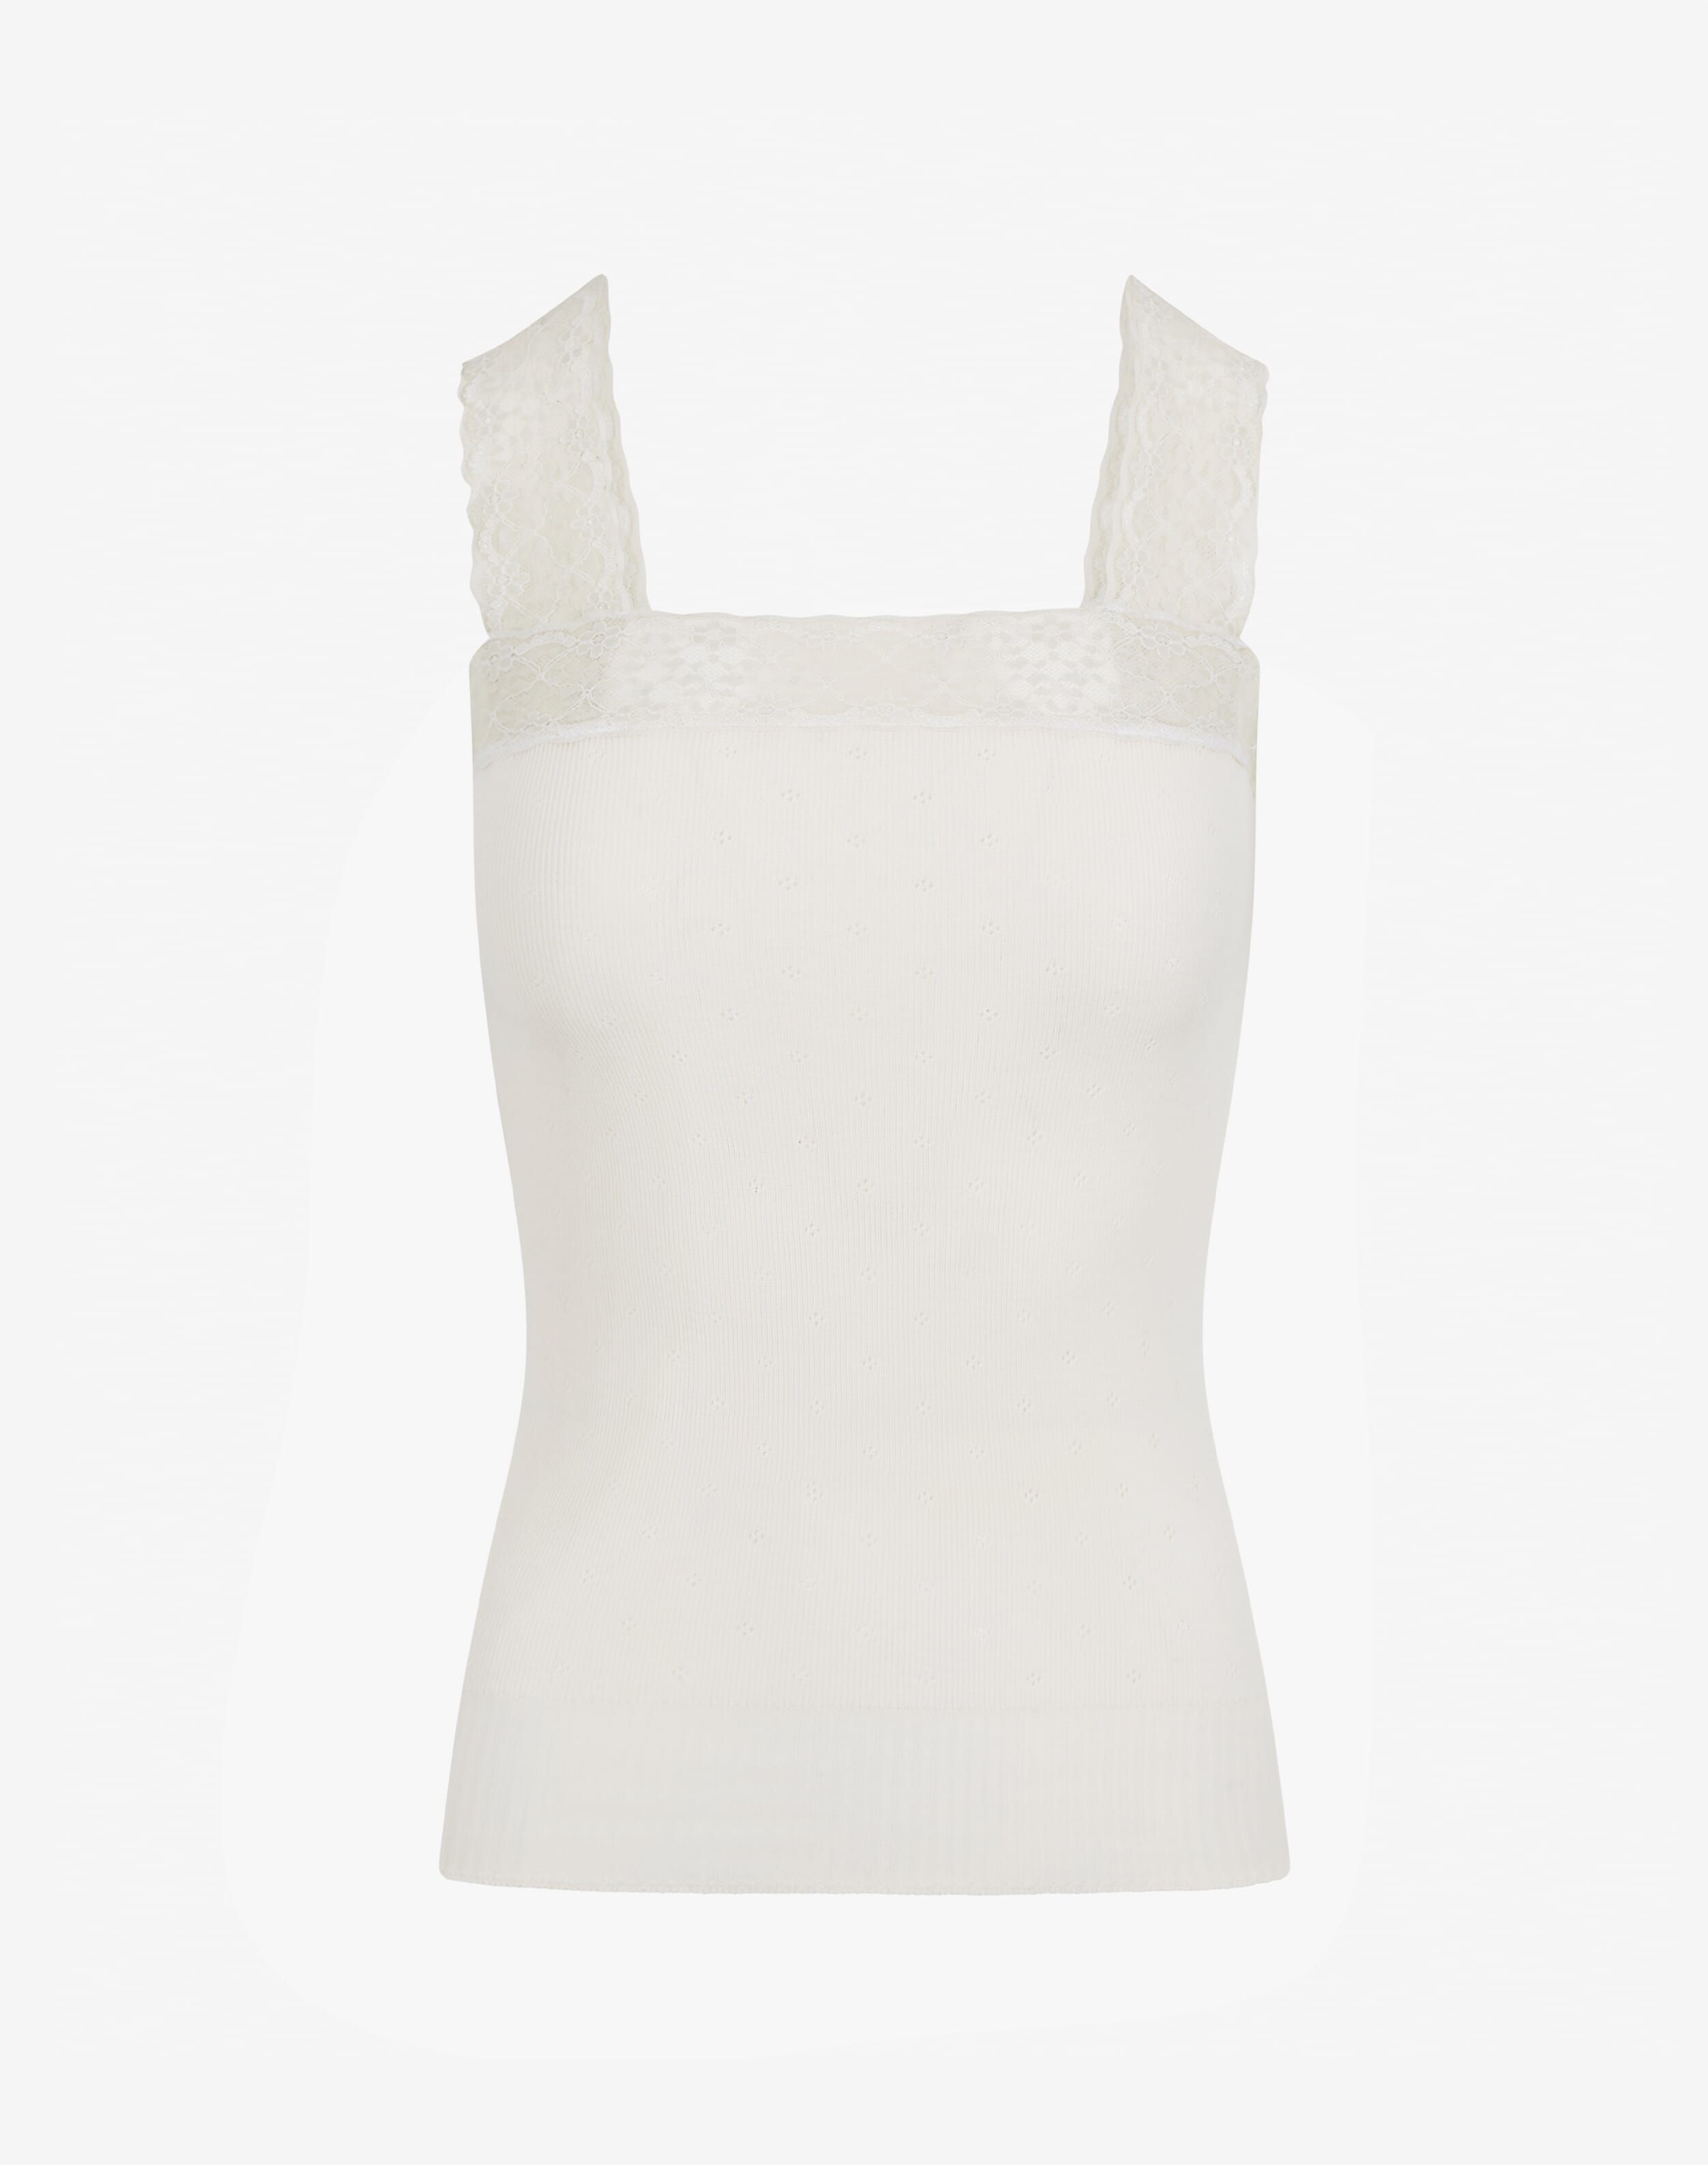 Lace Trim Camisole in Ivory | Women's Tops & T-Shirts | Brora